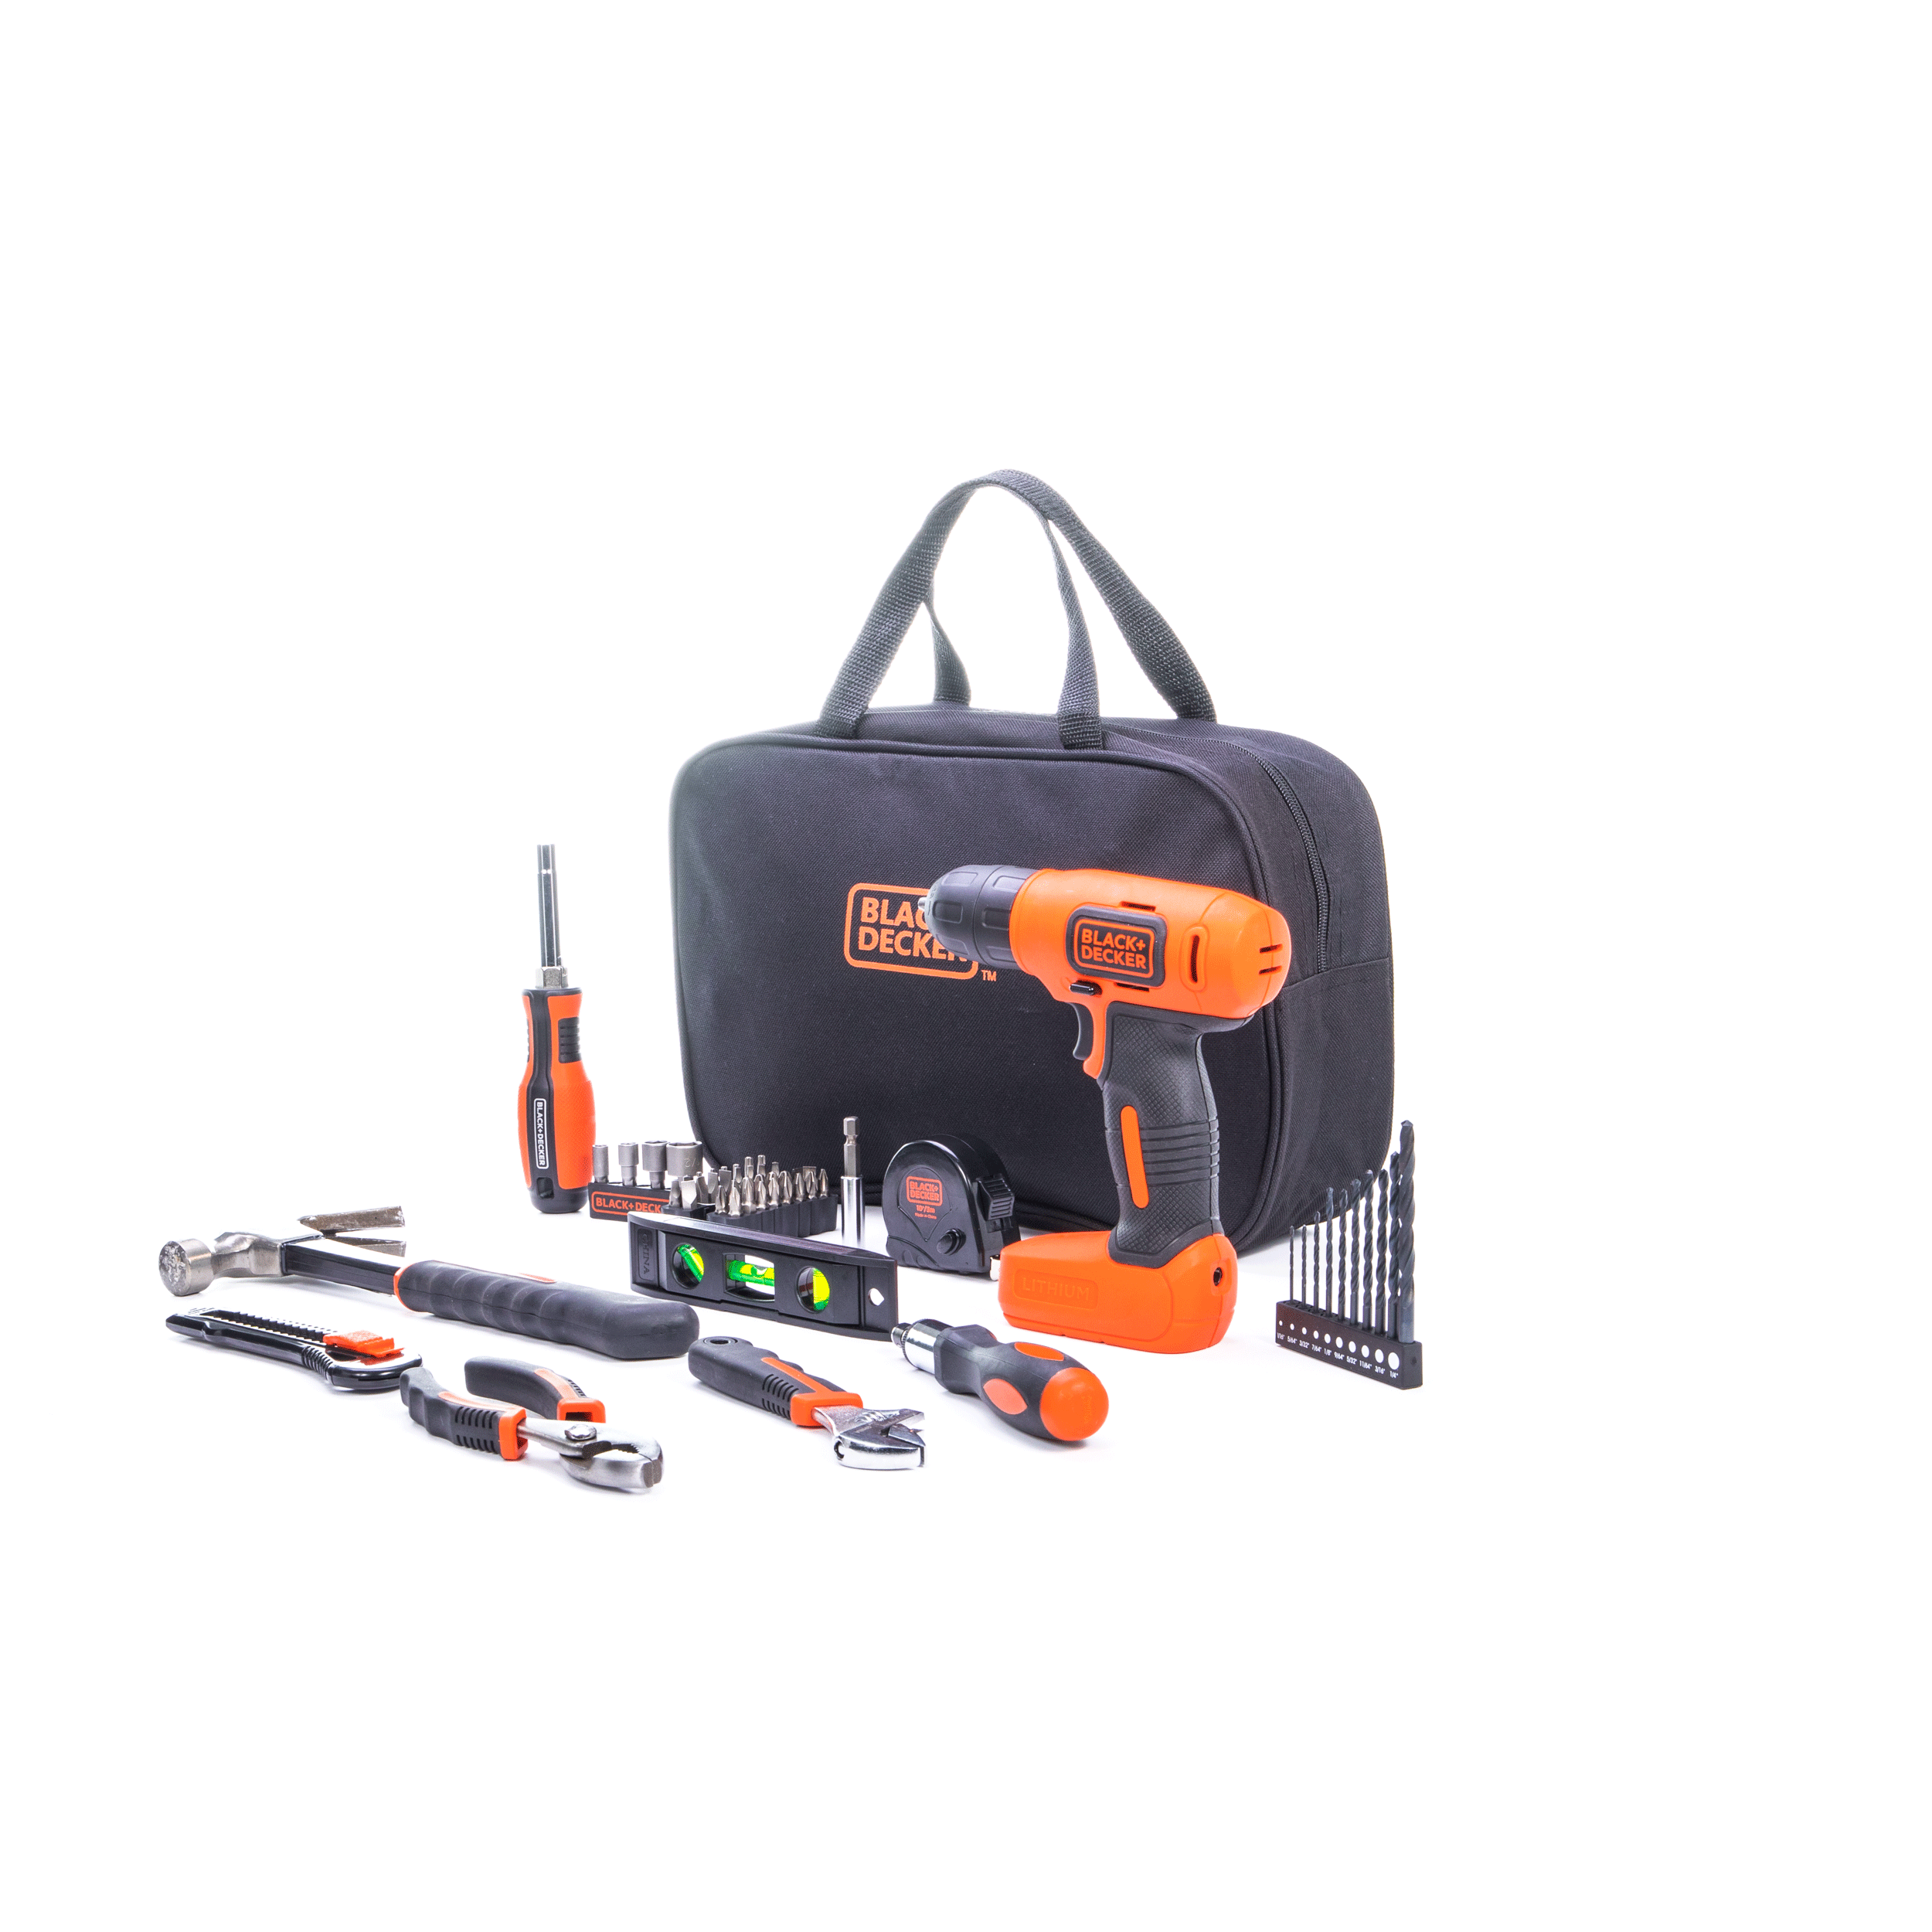 Black And Decker 3/8 Drill Kit No. 7131 with Case